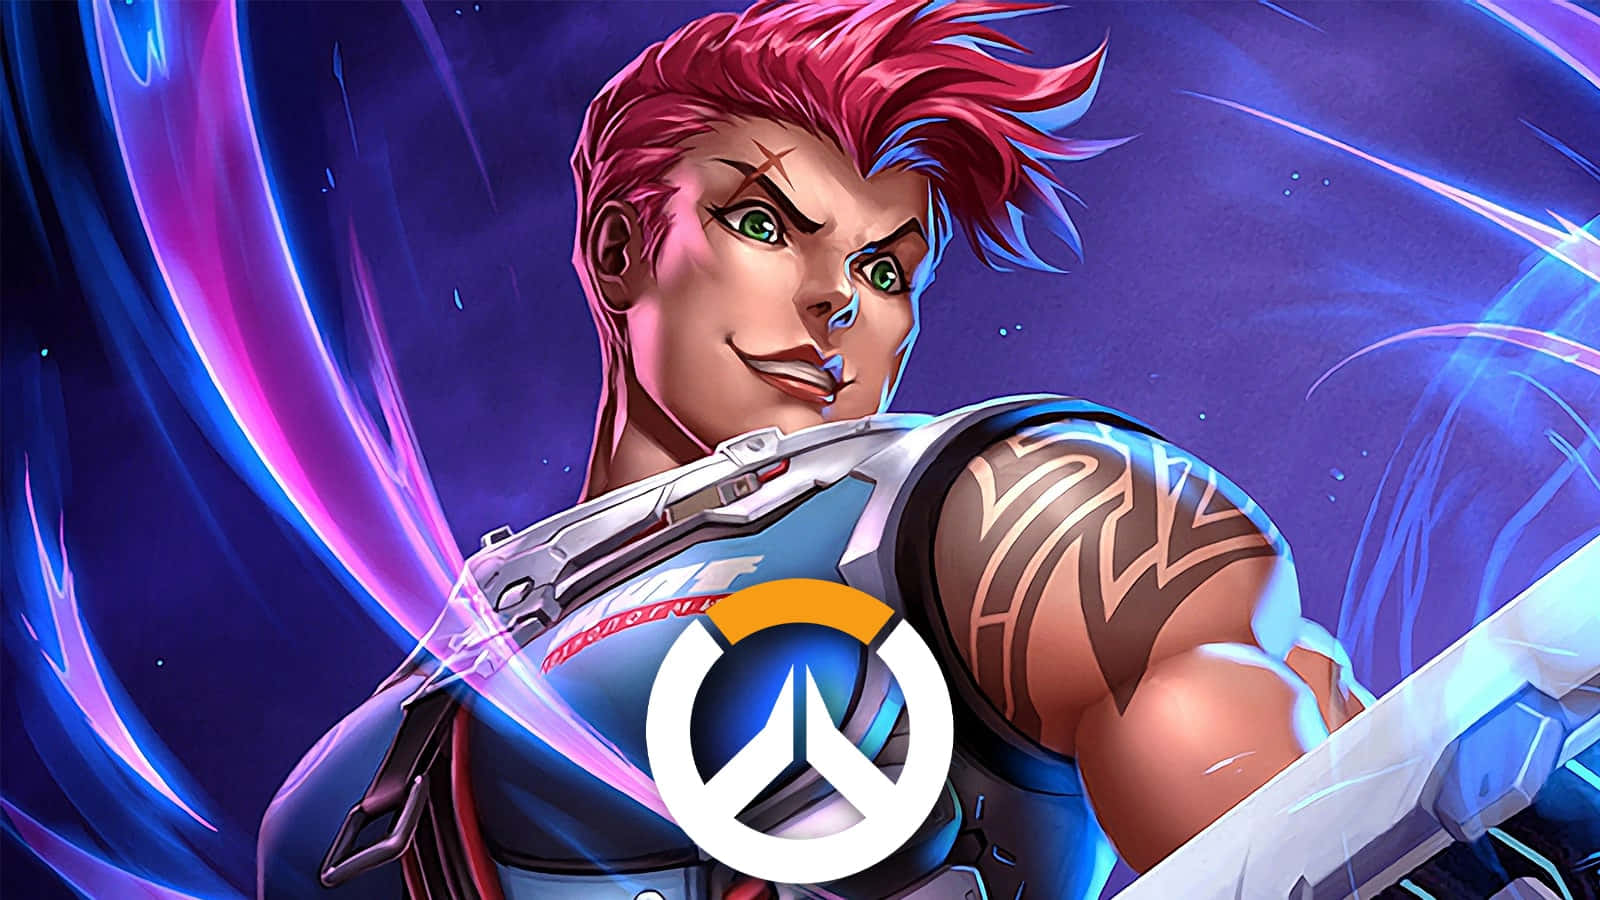 50 Zarya Overwatch HD Wallpapers and Backgrounds